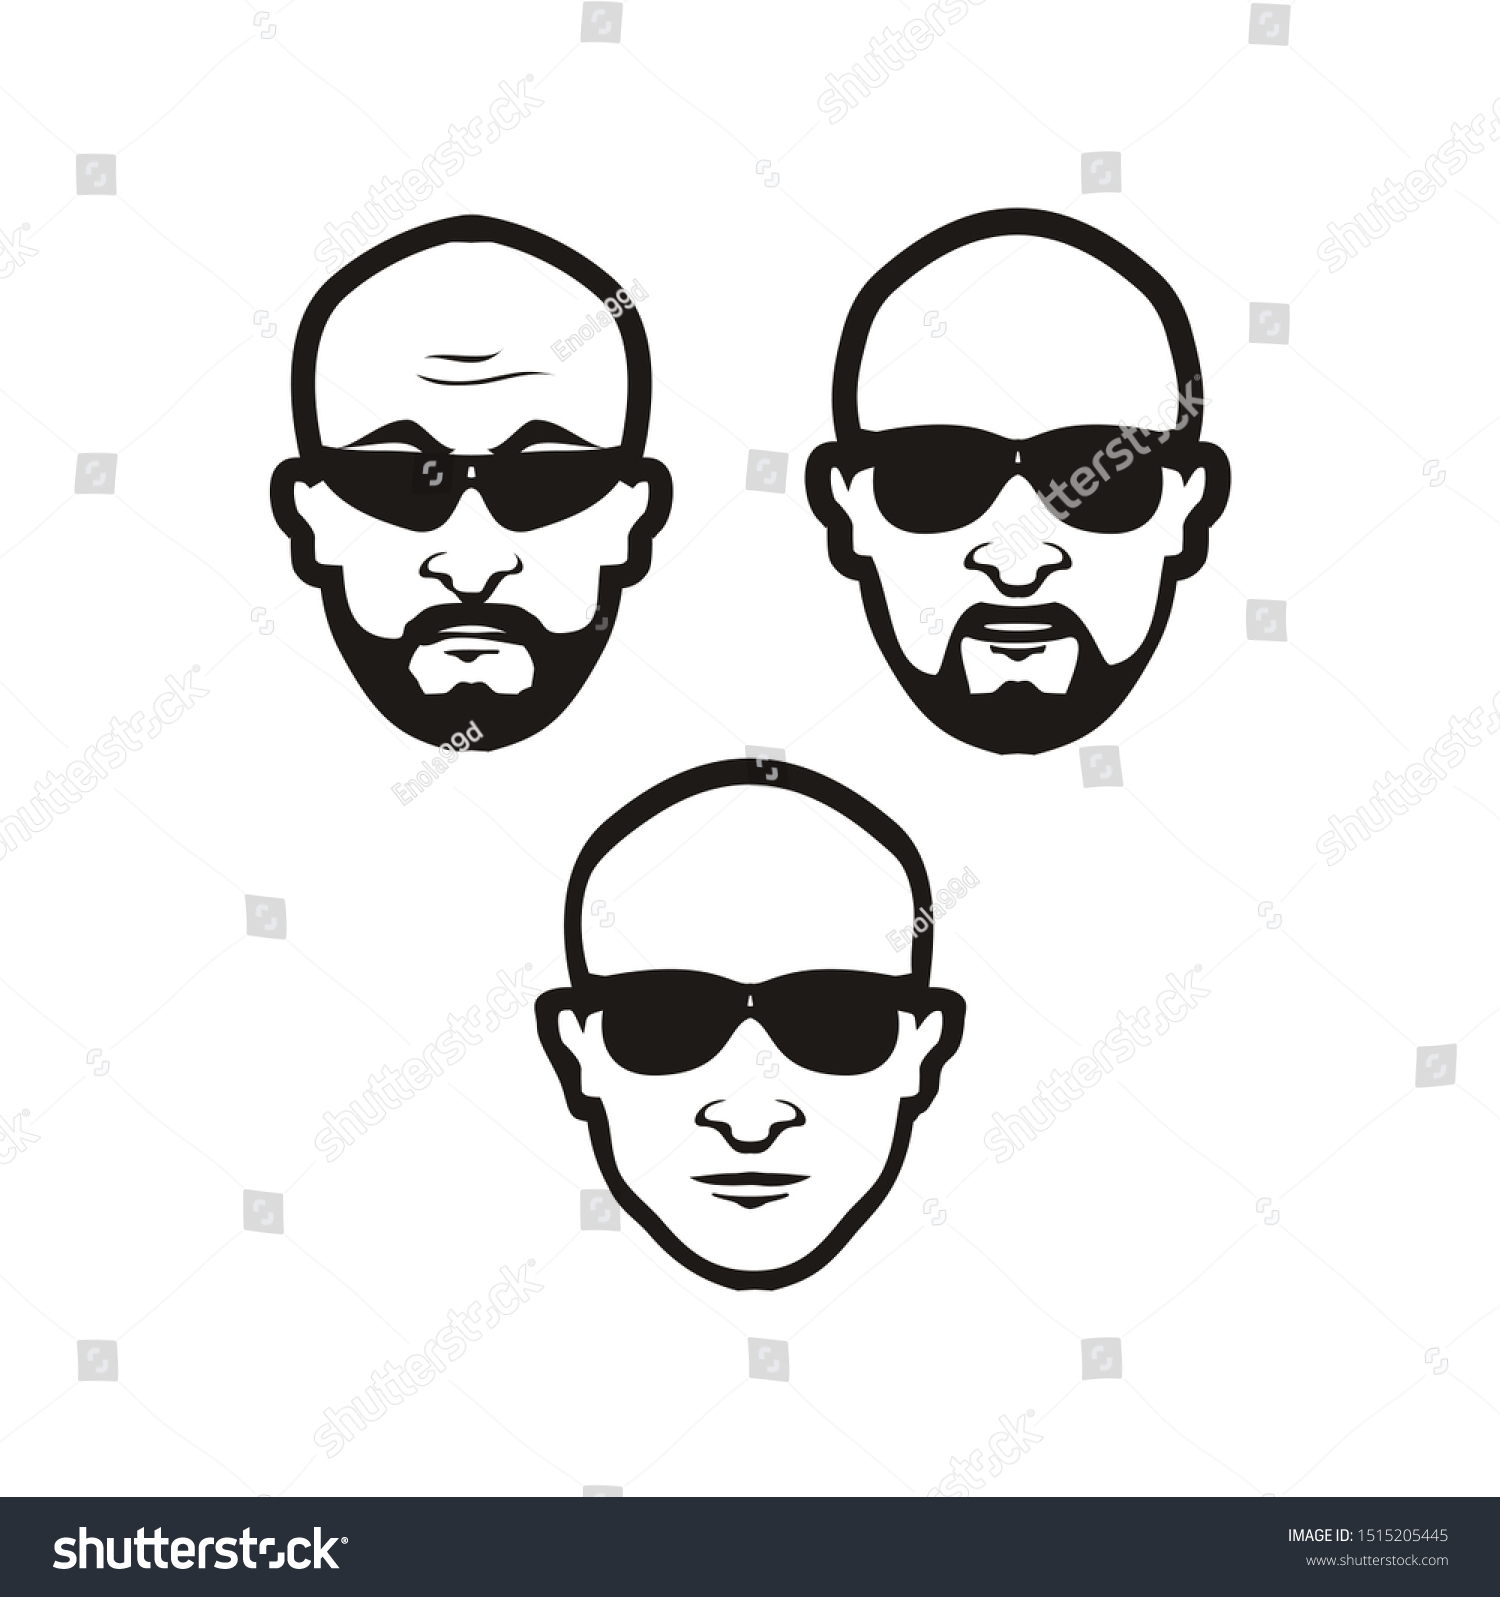 SVG of Bald Man Face with Black glasses and mustache beard svg